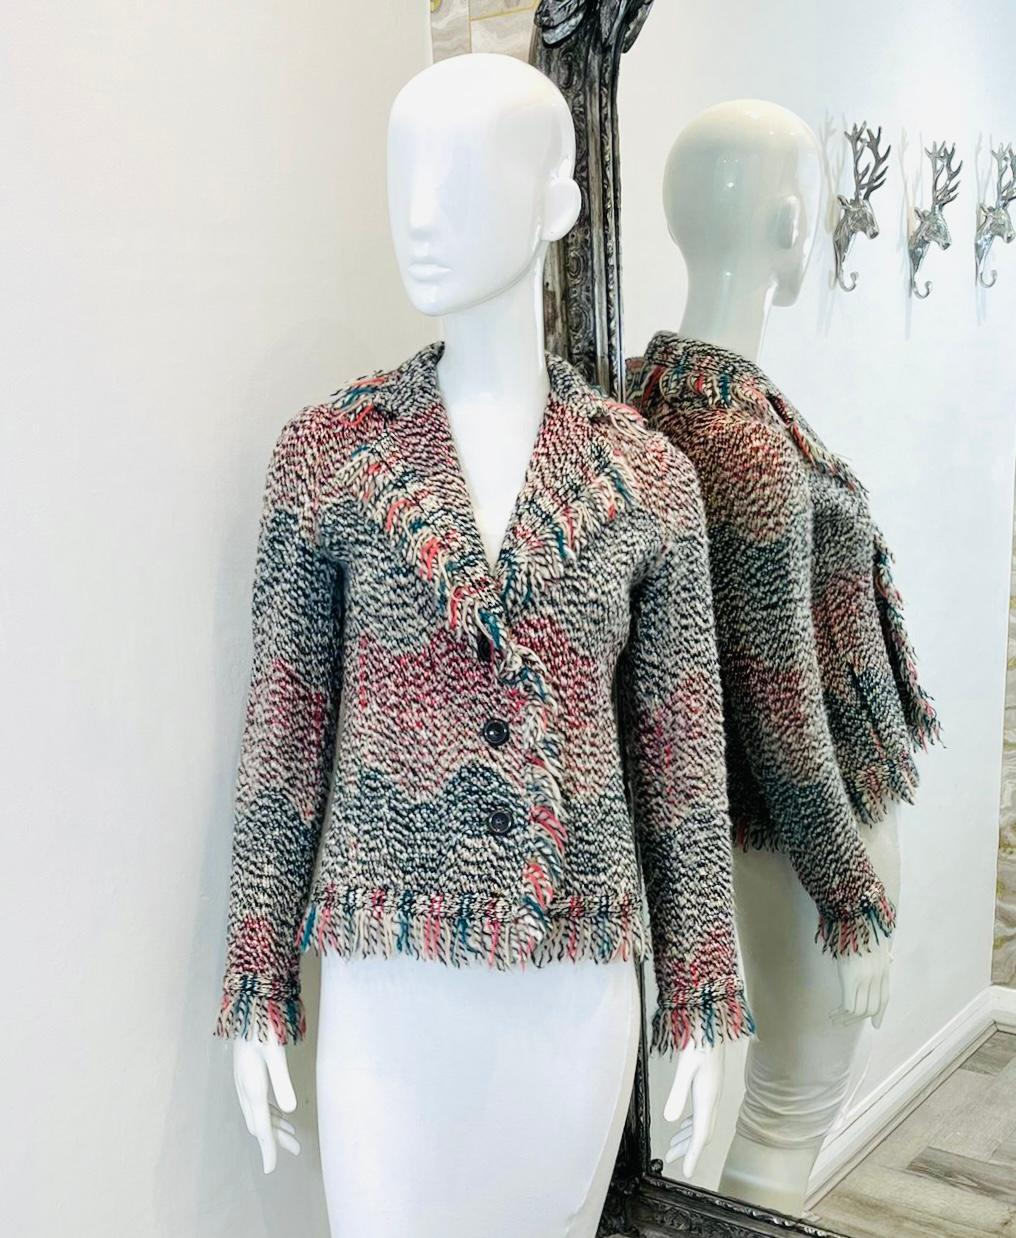 Missoni Fringe Trimmed Wool Jacket

Multicoloured knitted jacket designed with fringe trims.

Detailed with button centre closure, notched collar and slit pockets at waist.

Size – 40IT

Condition – Very Good

Composition – 95% Wool, 5% Nylon